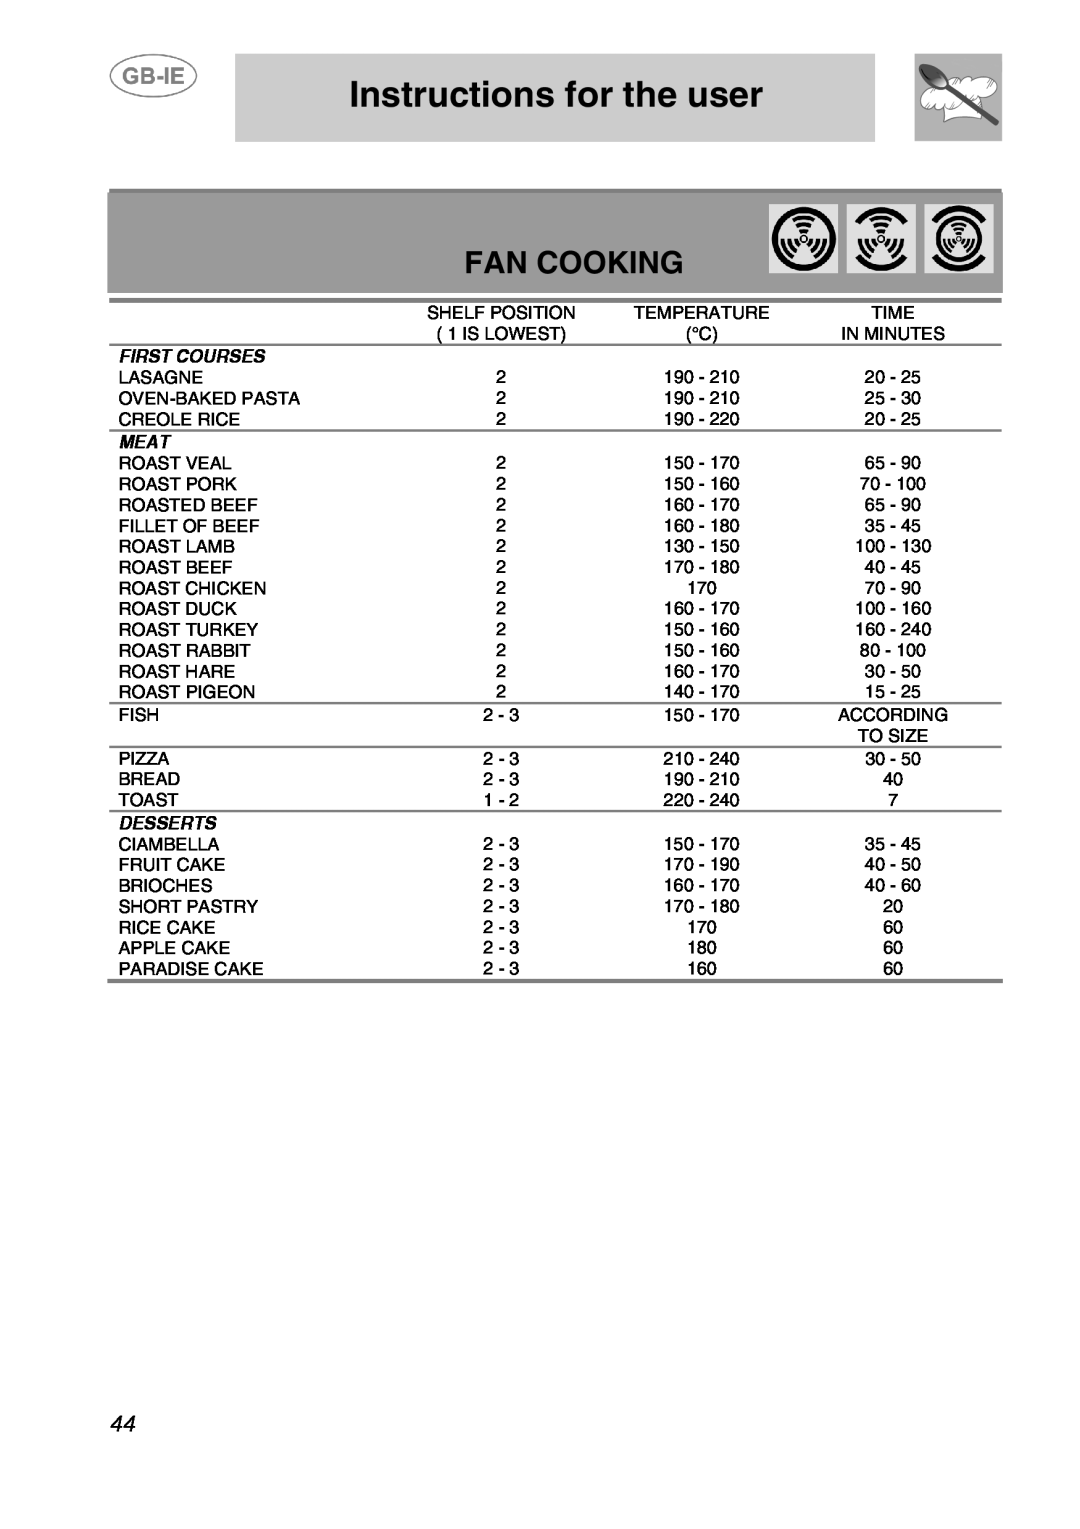 Smeg AP410X, AP320XC, AP320EB manual Fan Cooking, Instructions for the user, First Courses, Meat, Desserts 